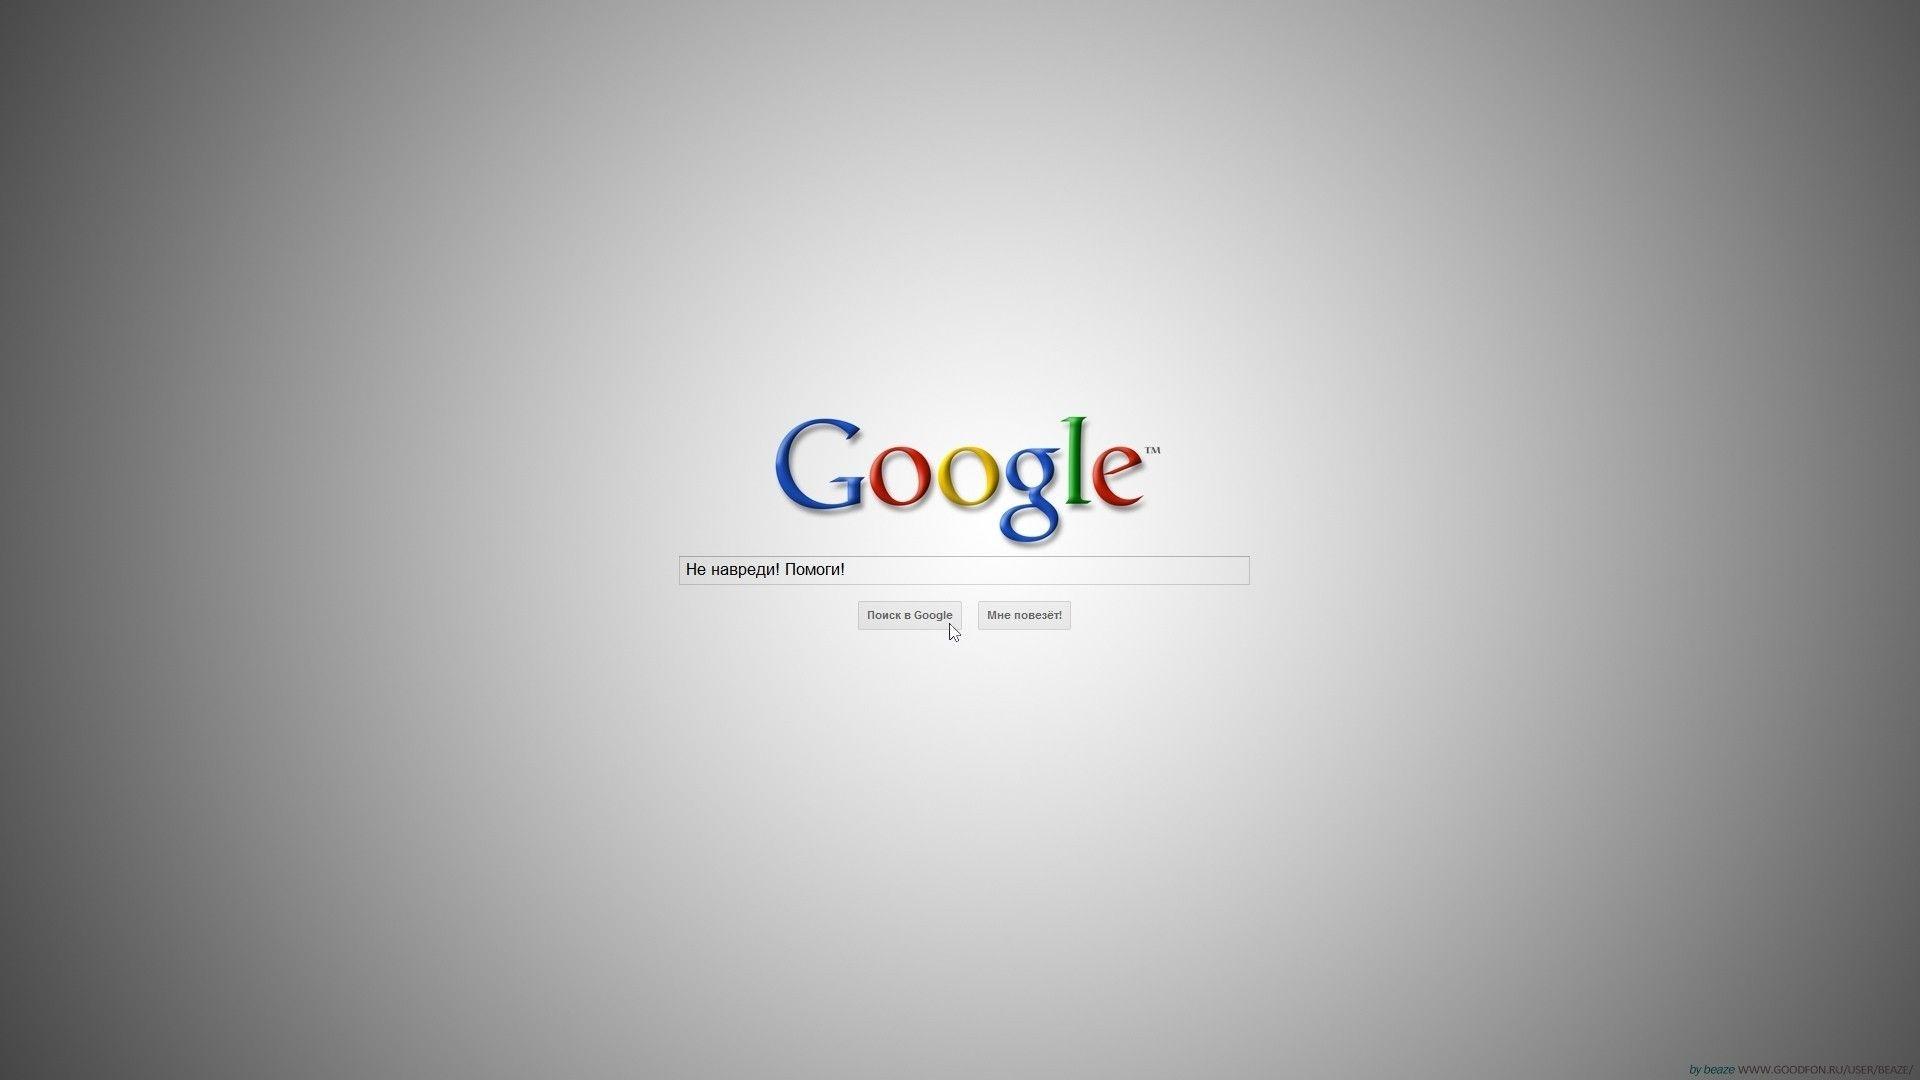 google search wallpaper 69223 - Image And Wallpaper free